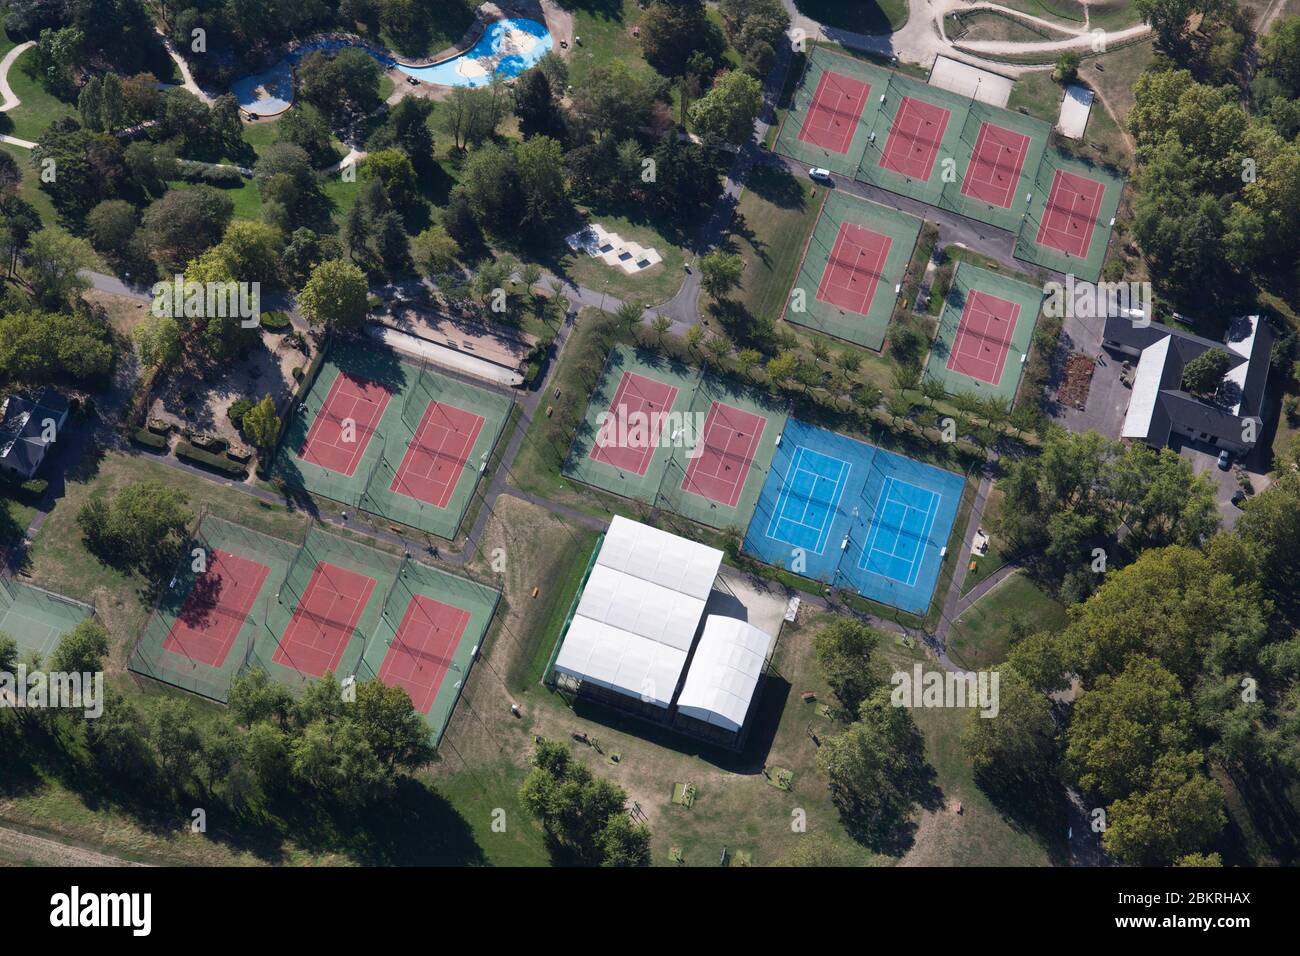 France, Val de Marne, Champigny sur Marne, Tremblay leisure and leisure park, tennis court (aerial view) Stock Photo